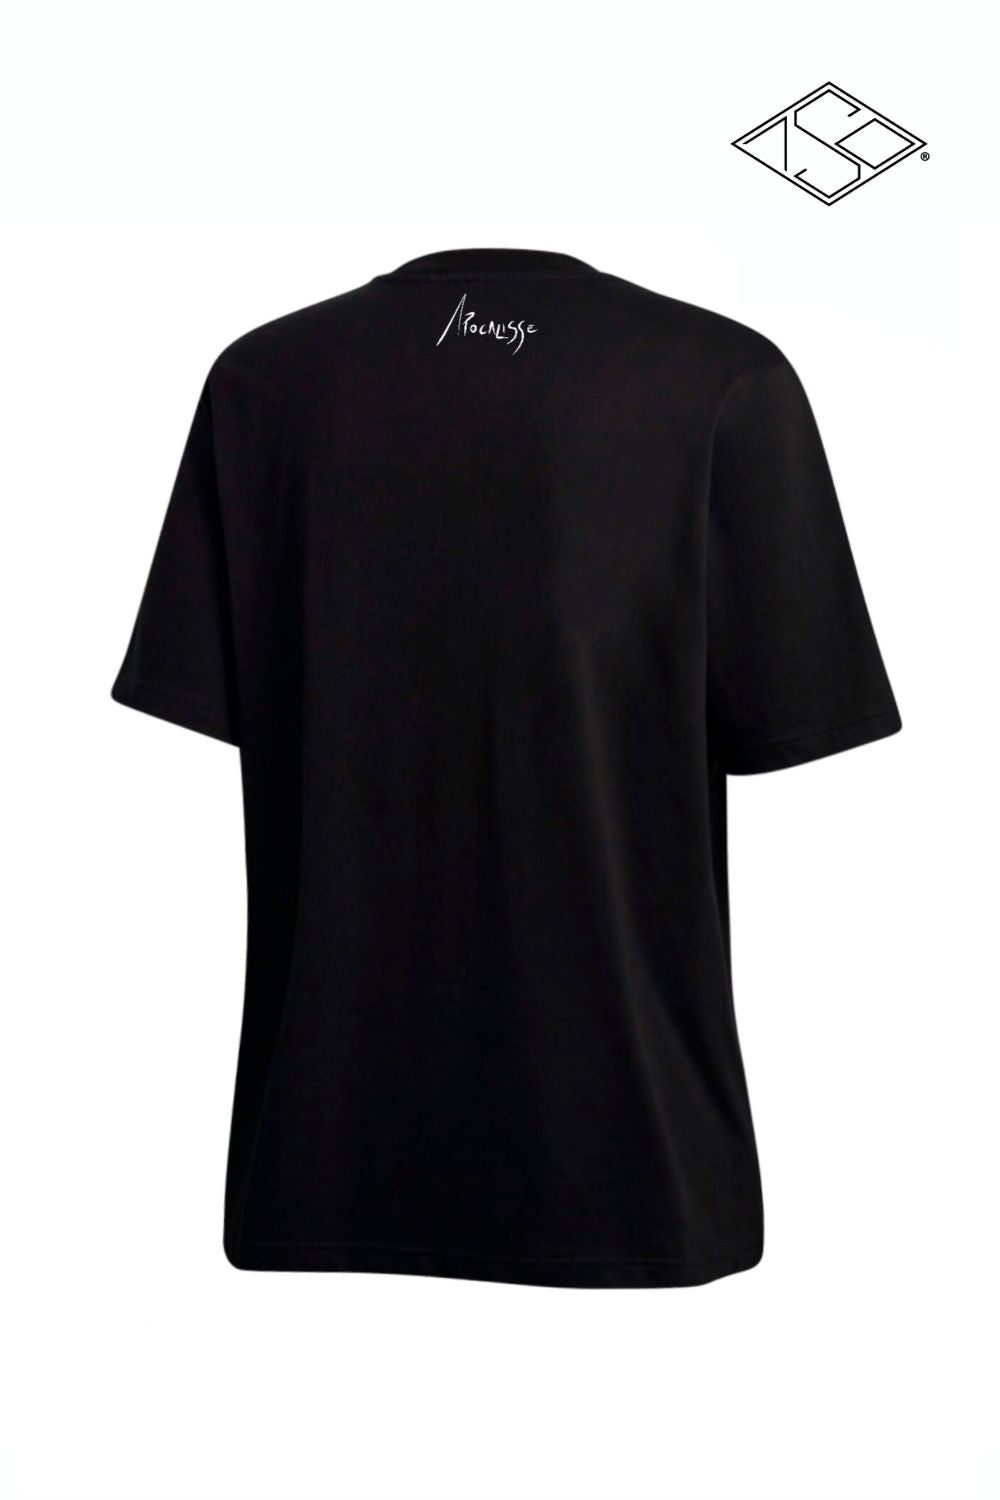 Apocalisse back black tshirt by ApocalisseSoldOut® Fashion Brand